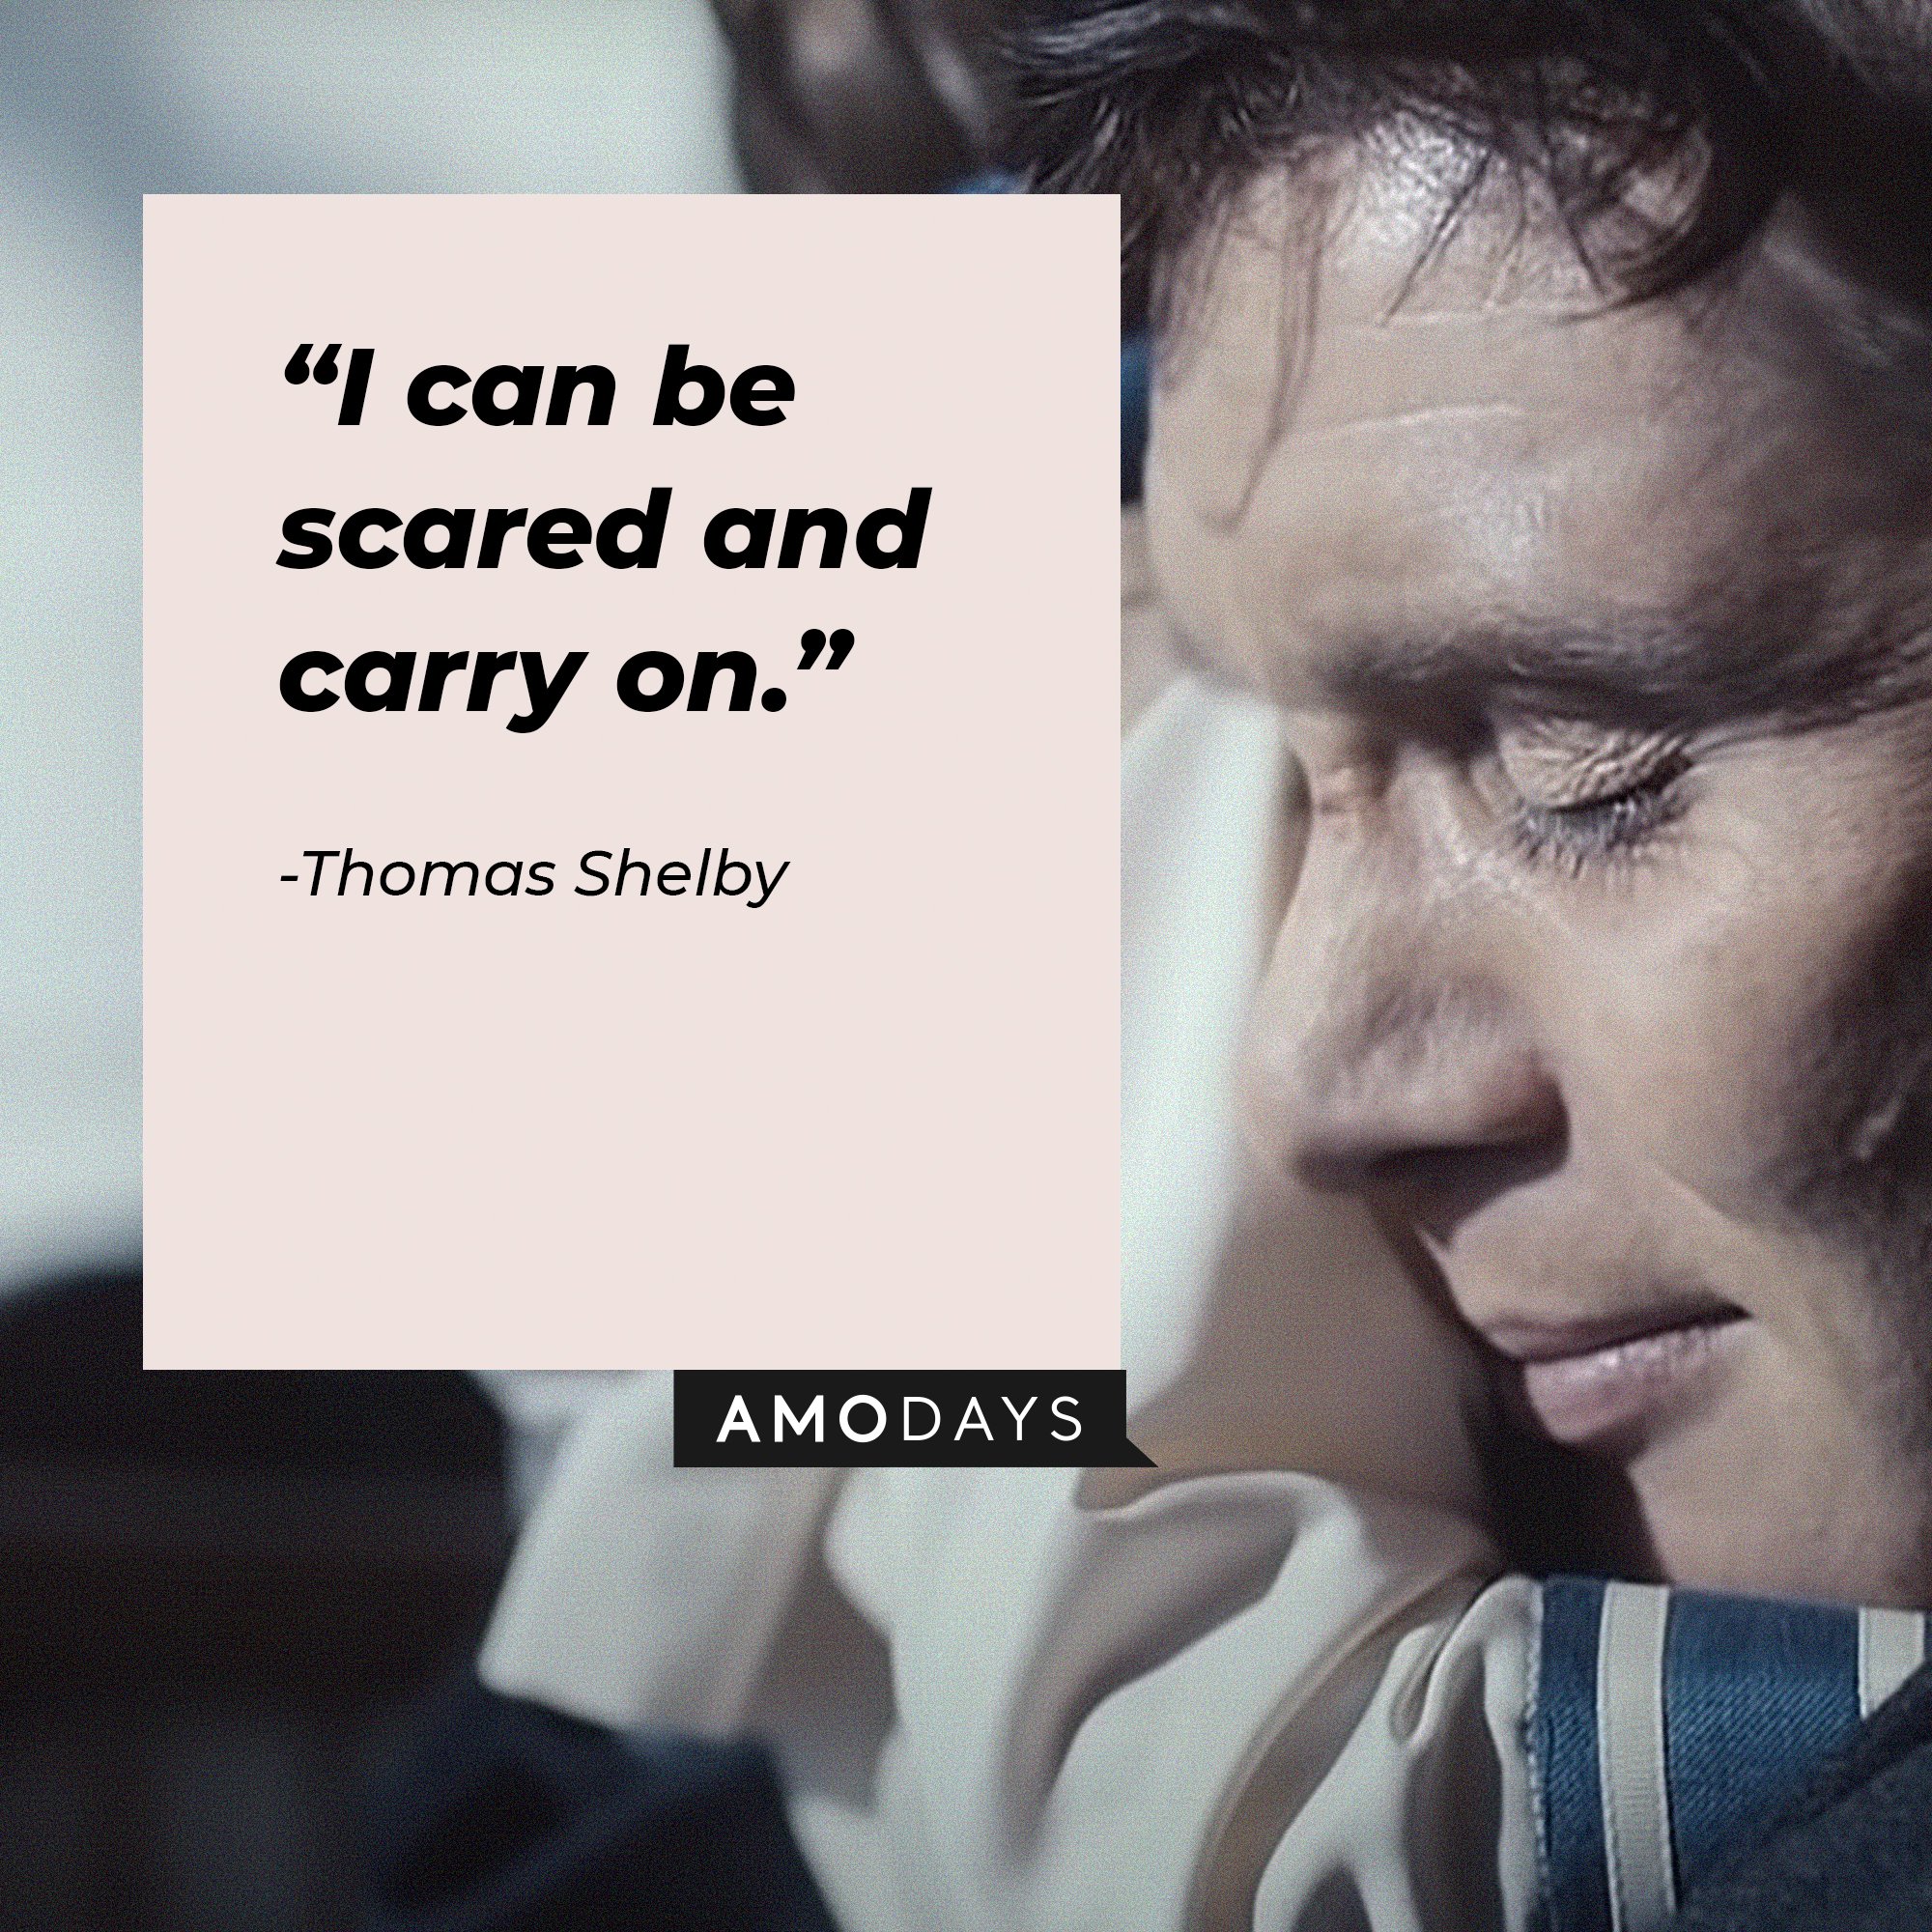 Thomas Shelby's quote: “I can be scared and carry on.”  | Image: AmoDays